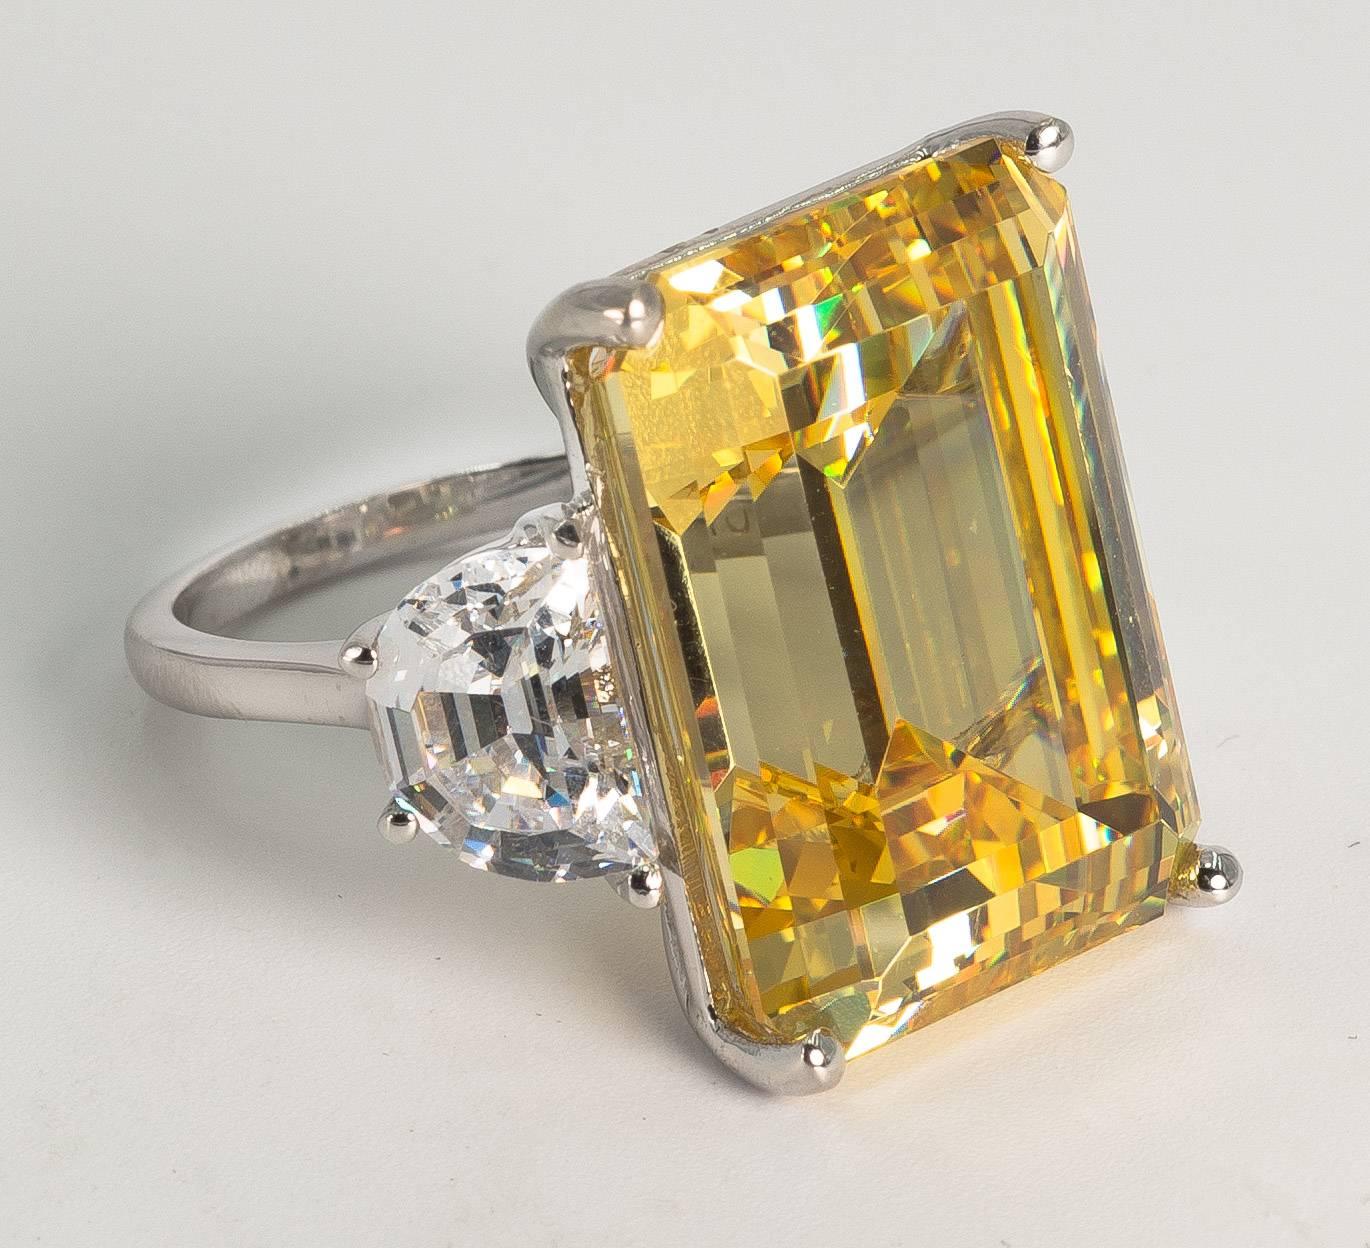 Magnificent faux 25 carat rectangular step cut intense canary yellow diamond made of the finest hand diamond-cut cubic zircon set with half moons either side in white gold. This ring has an amazing intense yellow brilliance and fire. Measures 1inch